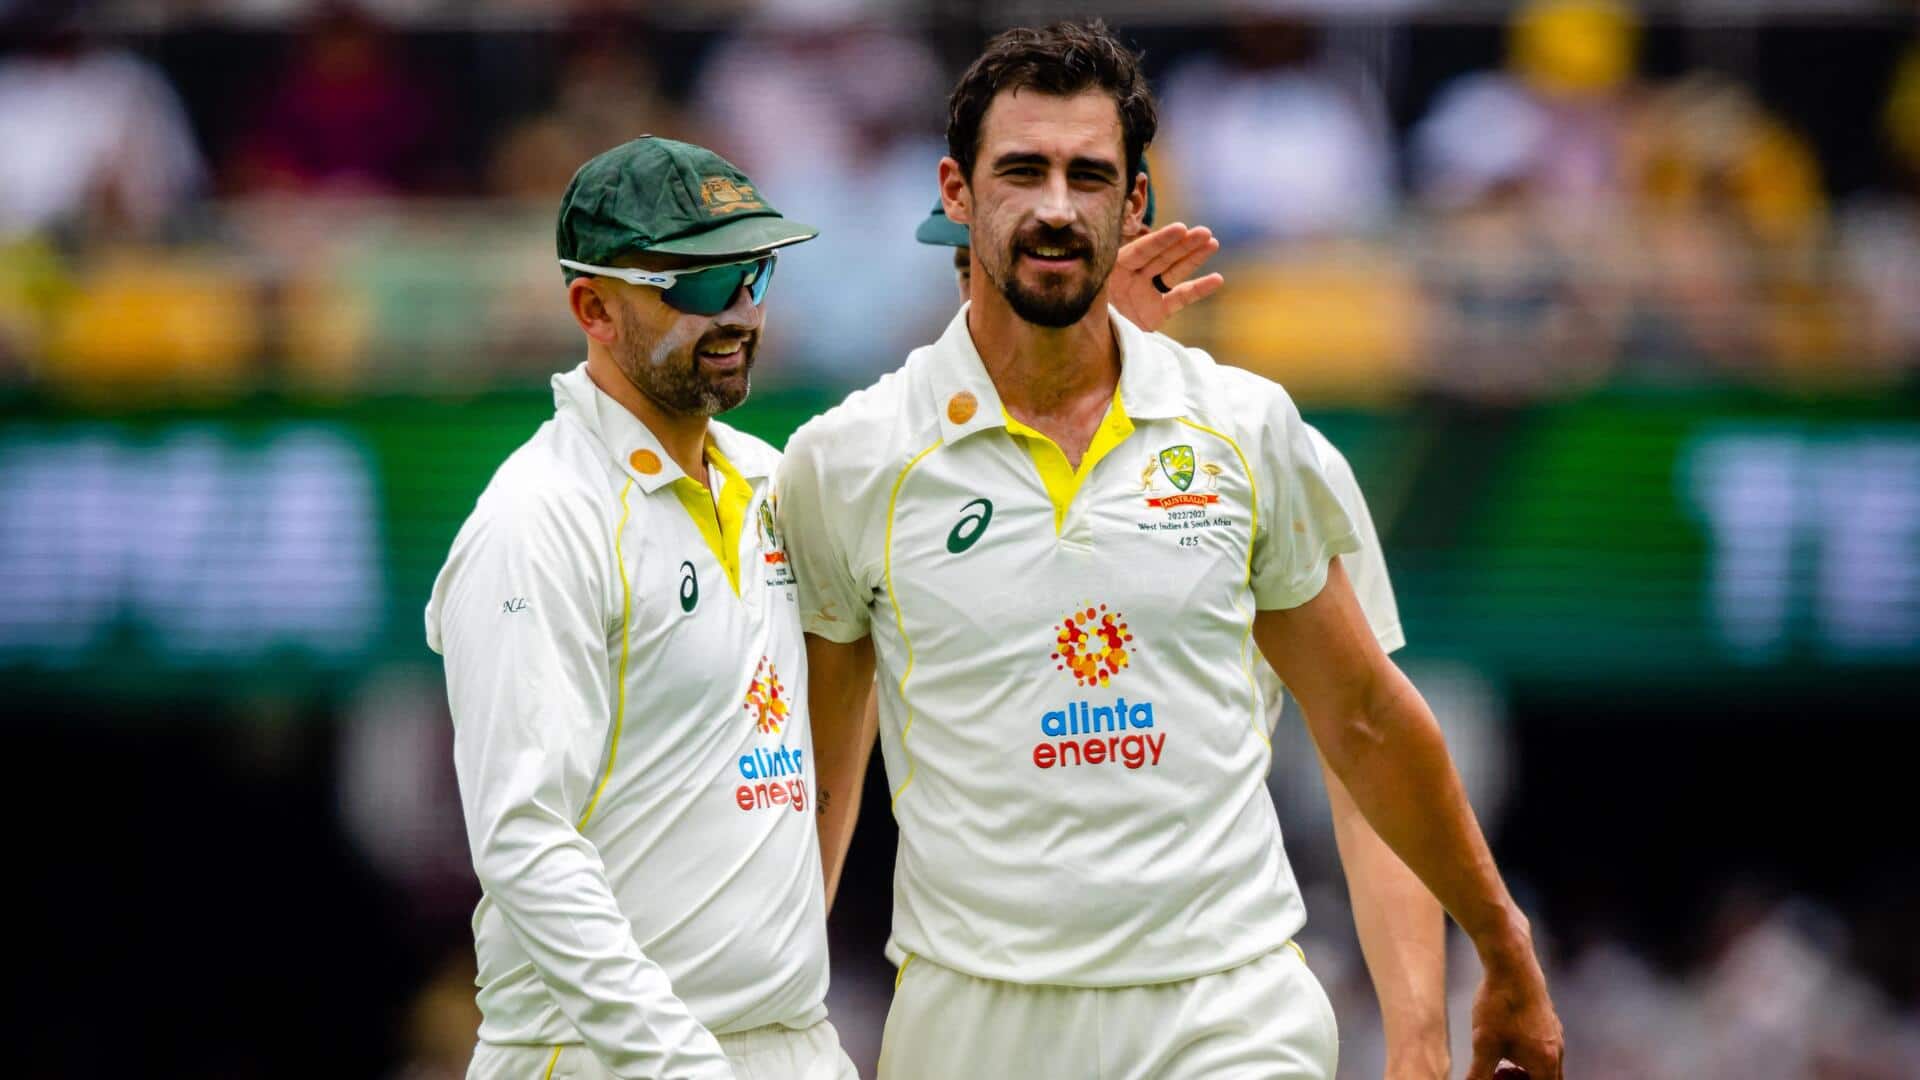 Mitchell Starc completes 50 Test wickets against Pakistan with four-fer